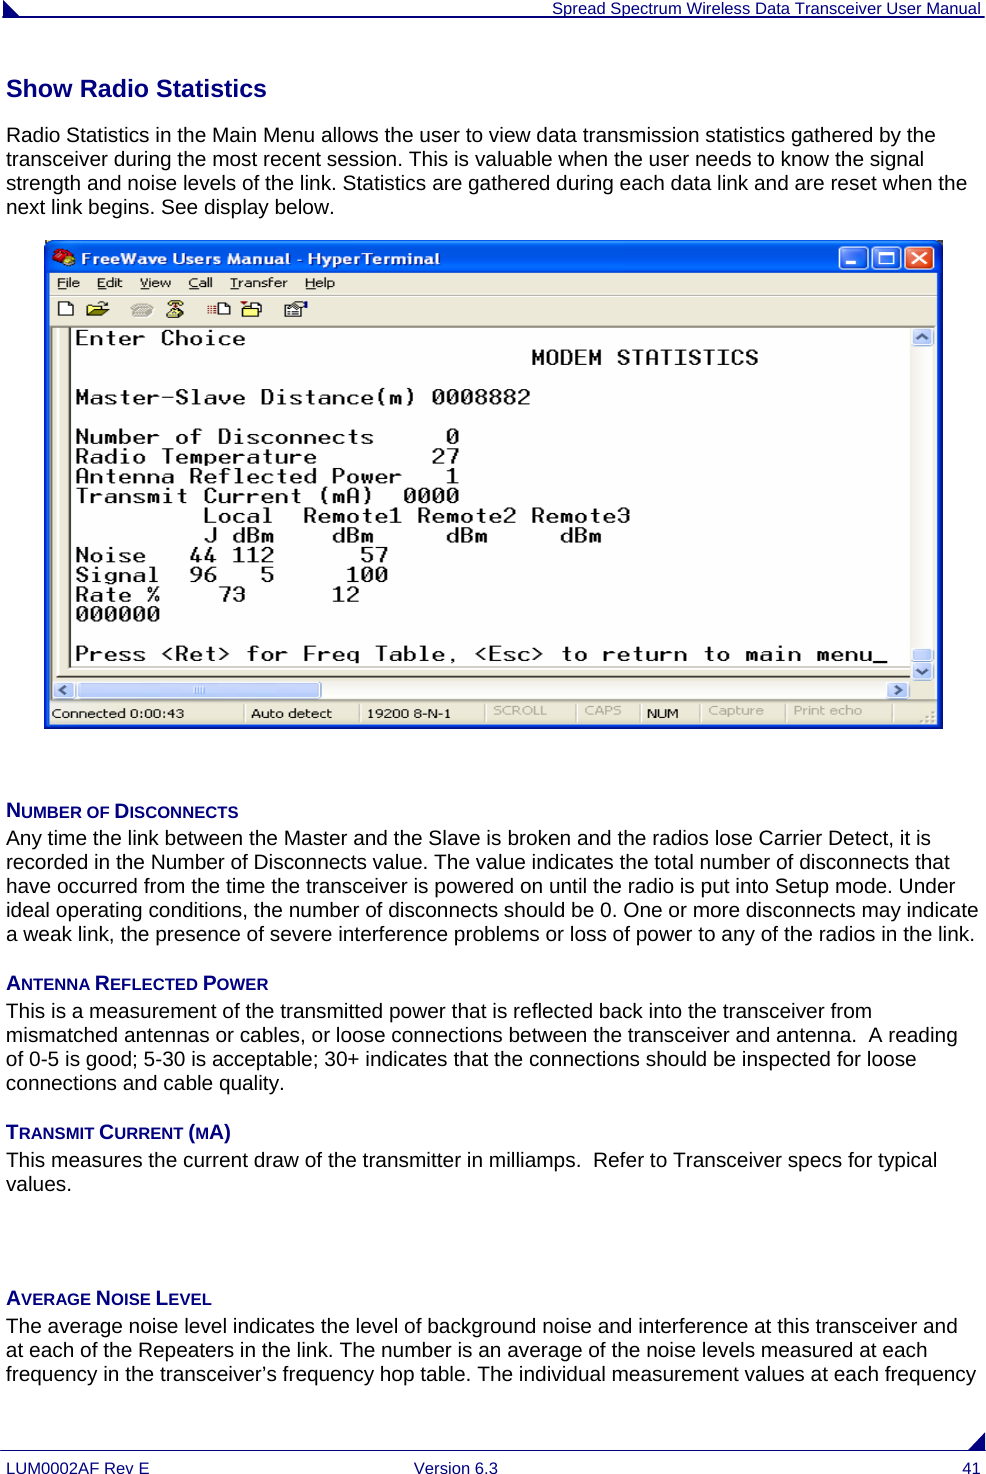  Spread Spectrum Wireless Data Transceiver User Manual LUM0002AF Rev E  Version 6.3  41 Show Radio Statistics  Radio Statistics in the Main Menu allows the user to view data transmission statistics gathered by the transceiver during the most recent session. This is valuable when the user needs to know the signal strength and noise levels of the link. Statistics are gathered during each data link and are reset when the next link begins. See display below.   NUMBER OF DISCONNECTS Any time the link between the Master and the Slave is broken and the radios lose Carrier Detect, it is recorded in the Number of Disconnects value. The value indicates the total number of disconnects that have occurred from the time the transceiver is powered on until the radio is put into Setup mode. Under ideal operating conditions, the number of disconnects should be 0. One or more disconnects may indicate a weak link, the presence of severe interference problems or loss of power to any of the radios in the link. ANTENNA REFLECTED POWER This is a measurement of the transmitted power that is reflected back into the transceiver from mismatched antennas or cables, or loose connections between the transceiver and antenna.  A reading of 0-5 is good; 5-30 is acceptable; 30+ indicates that the connections should be inspected for loose connections and cable quality. TRANSMIT CURRENT (MA) This measures the current draw of the transmitter in milliamps.  Refer to Transceiver specs for typical values.   AVERAGE NOISE LEVEL The average noise level indicates the level of background noise and interference at this transceiver and at each of the Repeaters in the link. The number is an average of the noise levels measured at each frequency in the transceiver’s frequency hop table. The individual measurement values at each frequency 